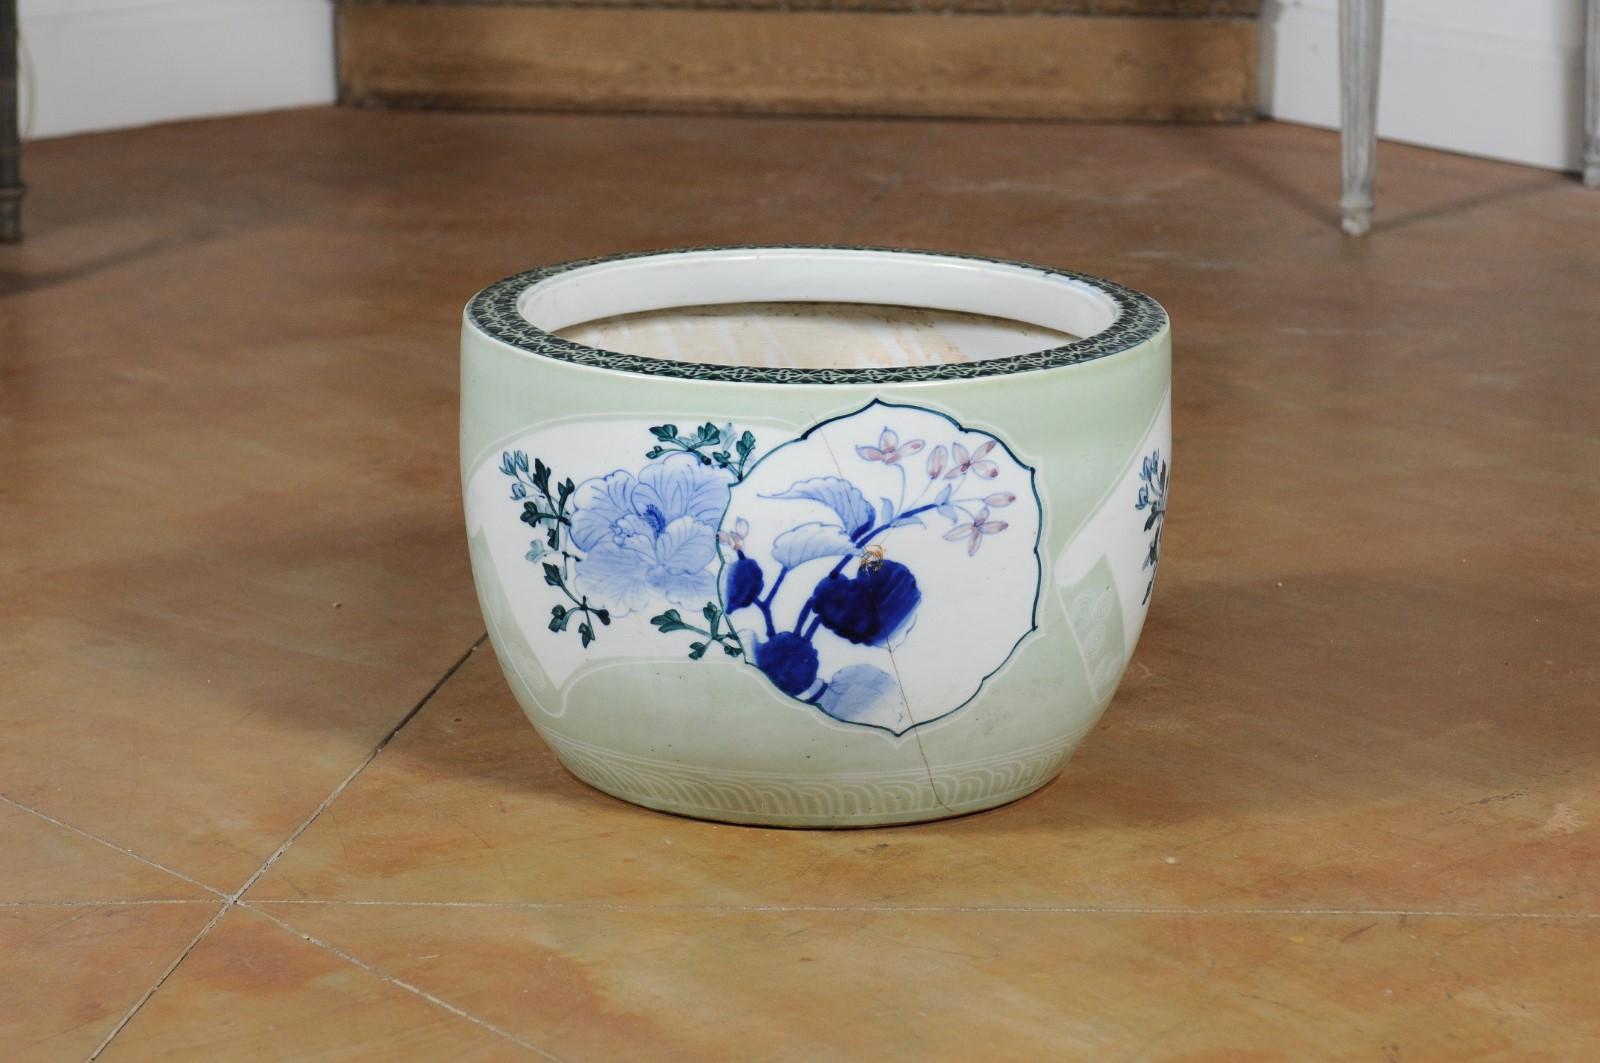 A Japanese goldfish bowl from the 19th century, with soft green ground and blue floral decor. Attracting our attention with its soft colors and delicate decor, this Japanese goldfish bowl features a light green ground accented with white scrolls on